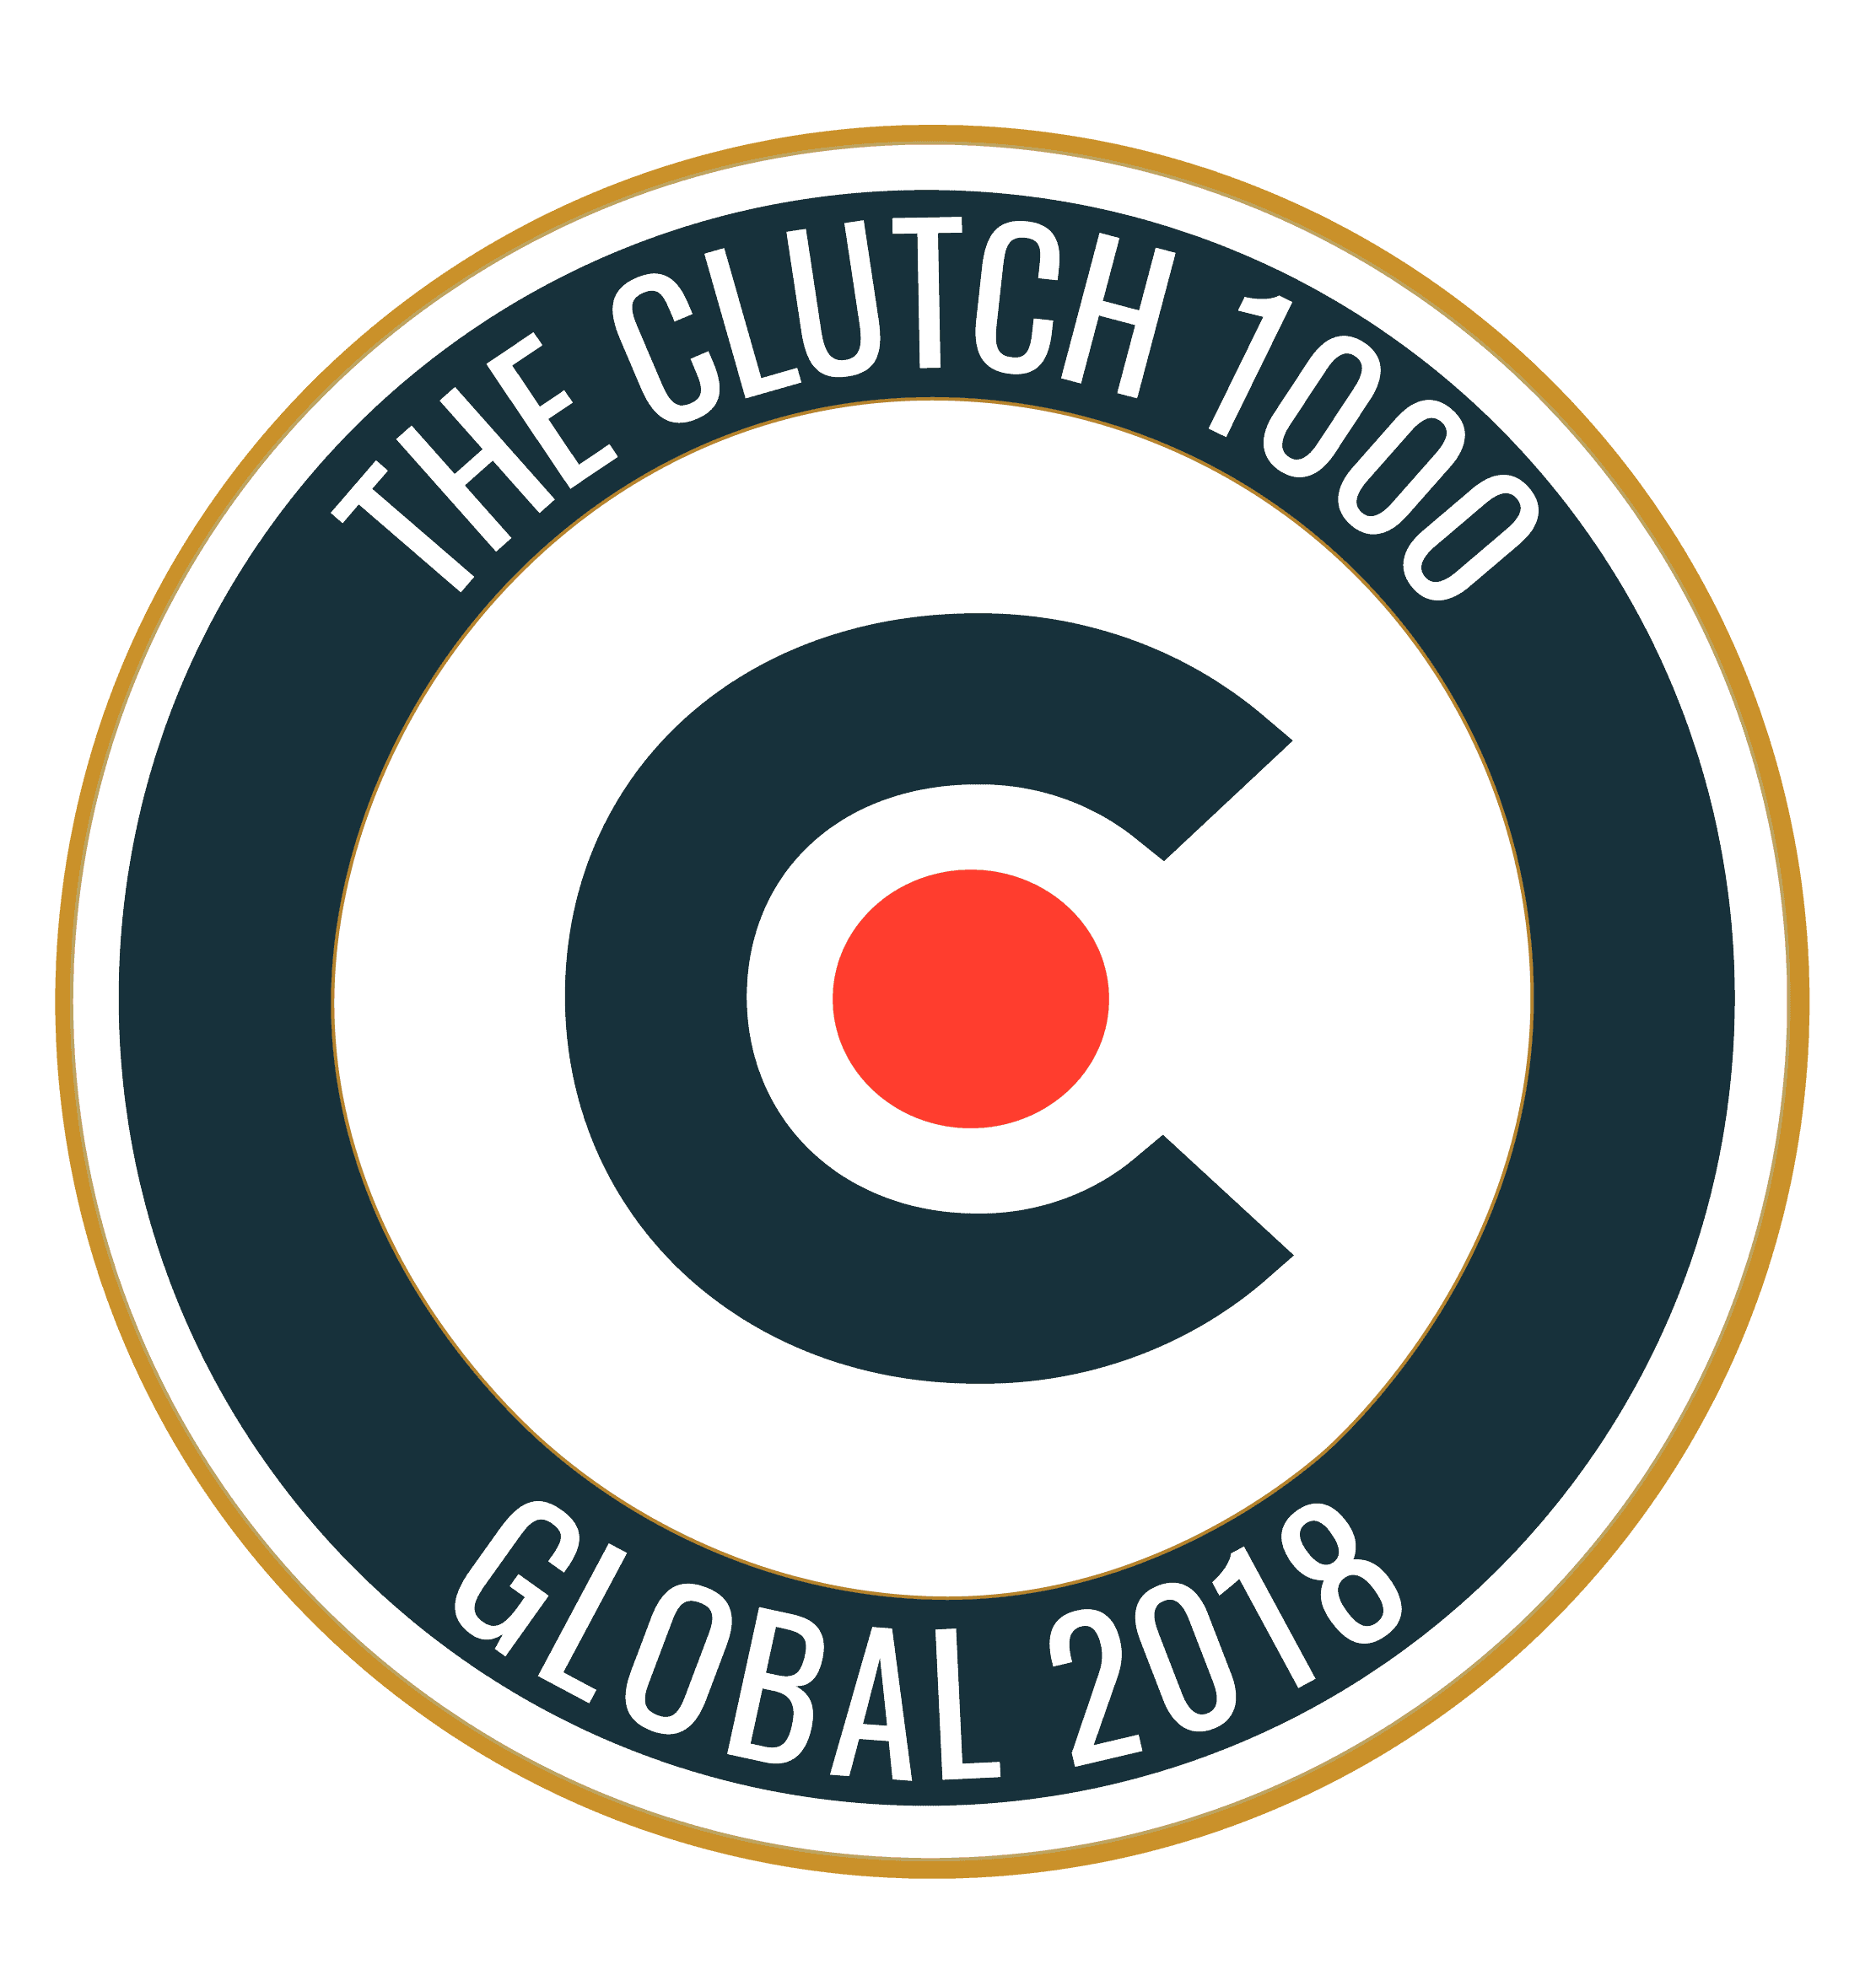 Clutch 2018 - Xtra Mile - Chosen by Clutch 1000 to be the top advertising & marketing company in Israel!